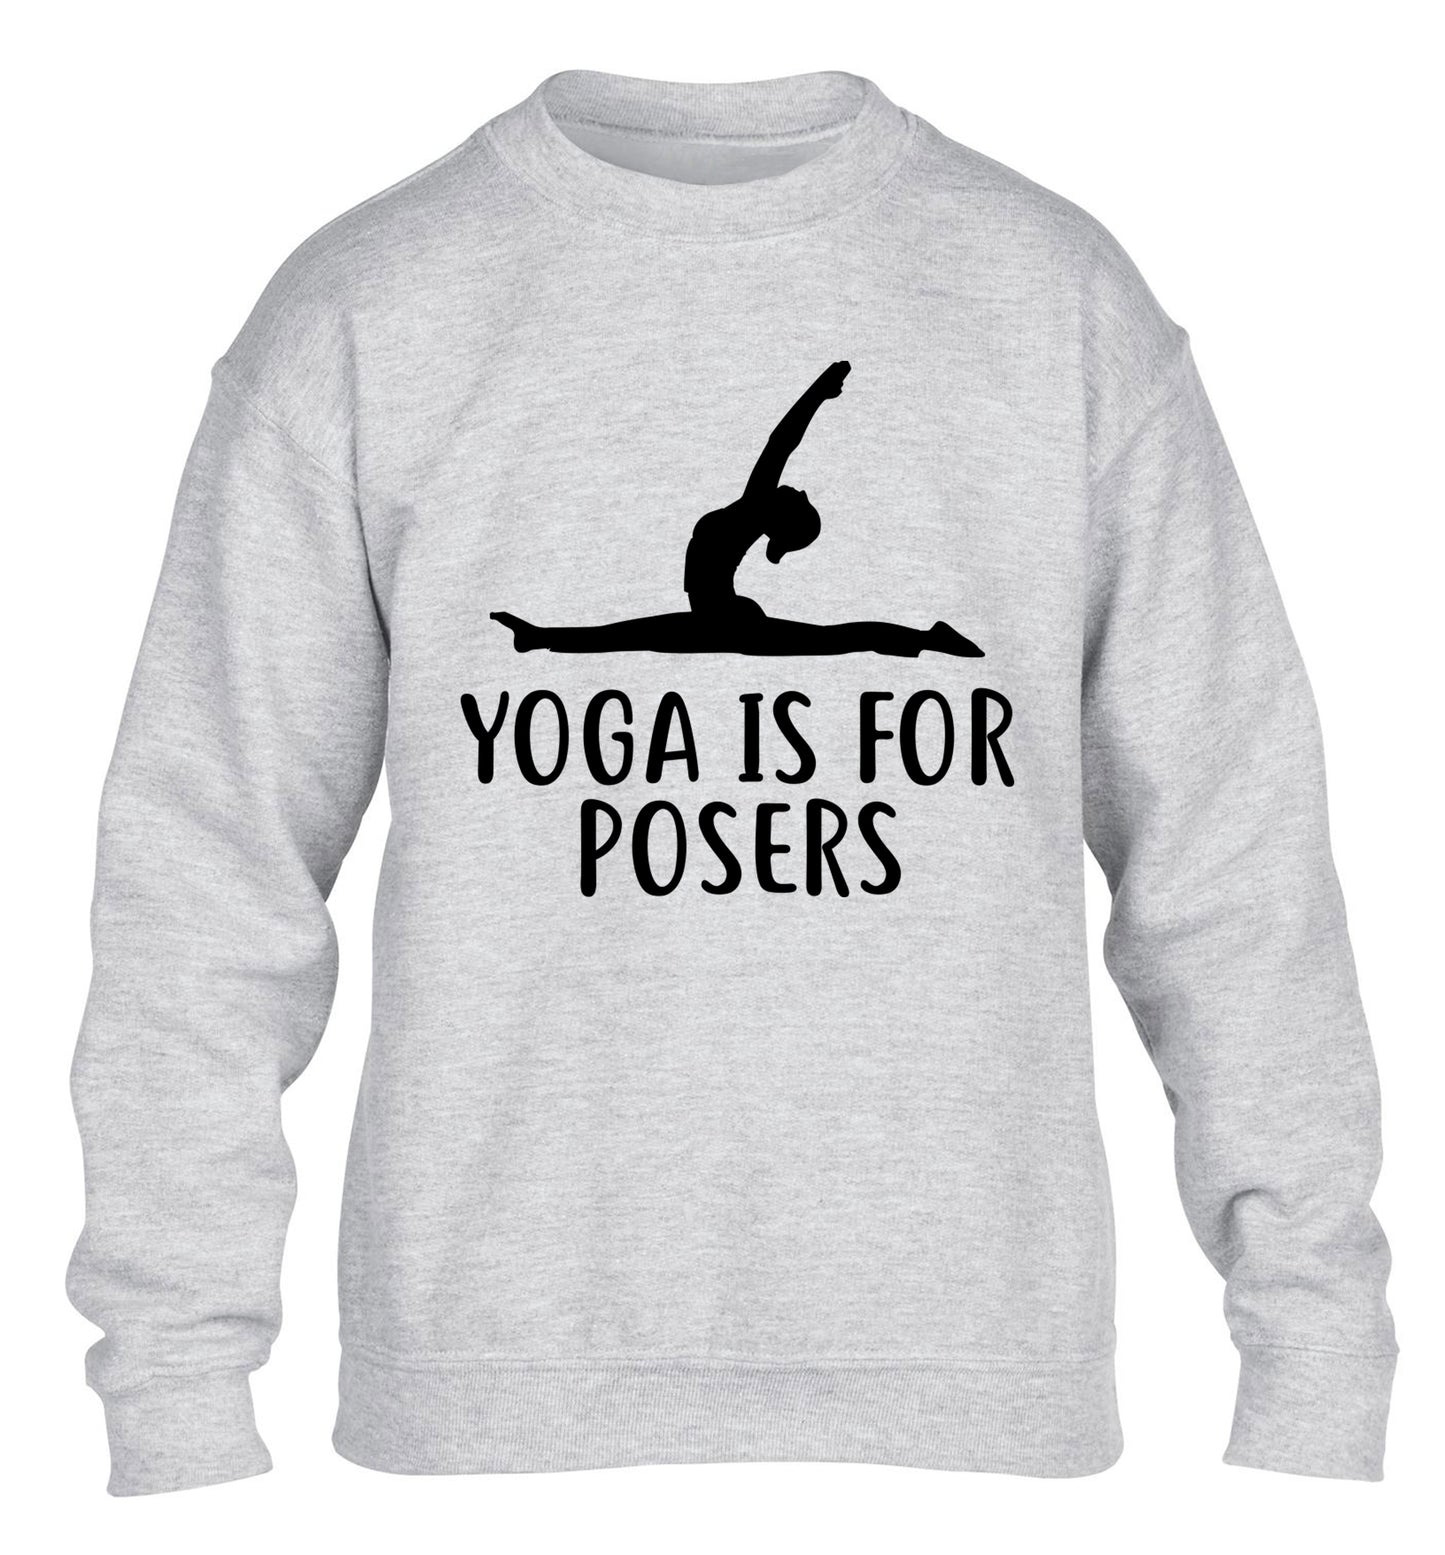 Yoga is for posers children's grey sweater 12-13 Years